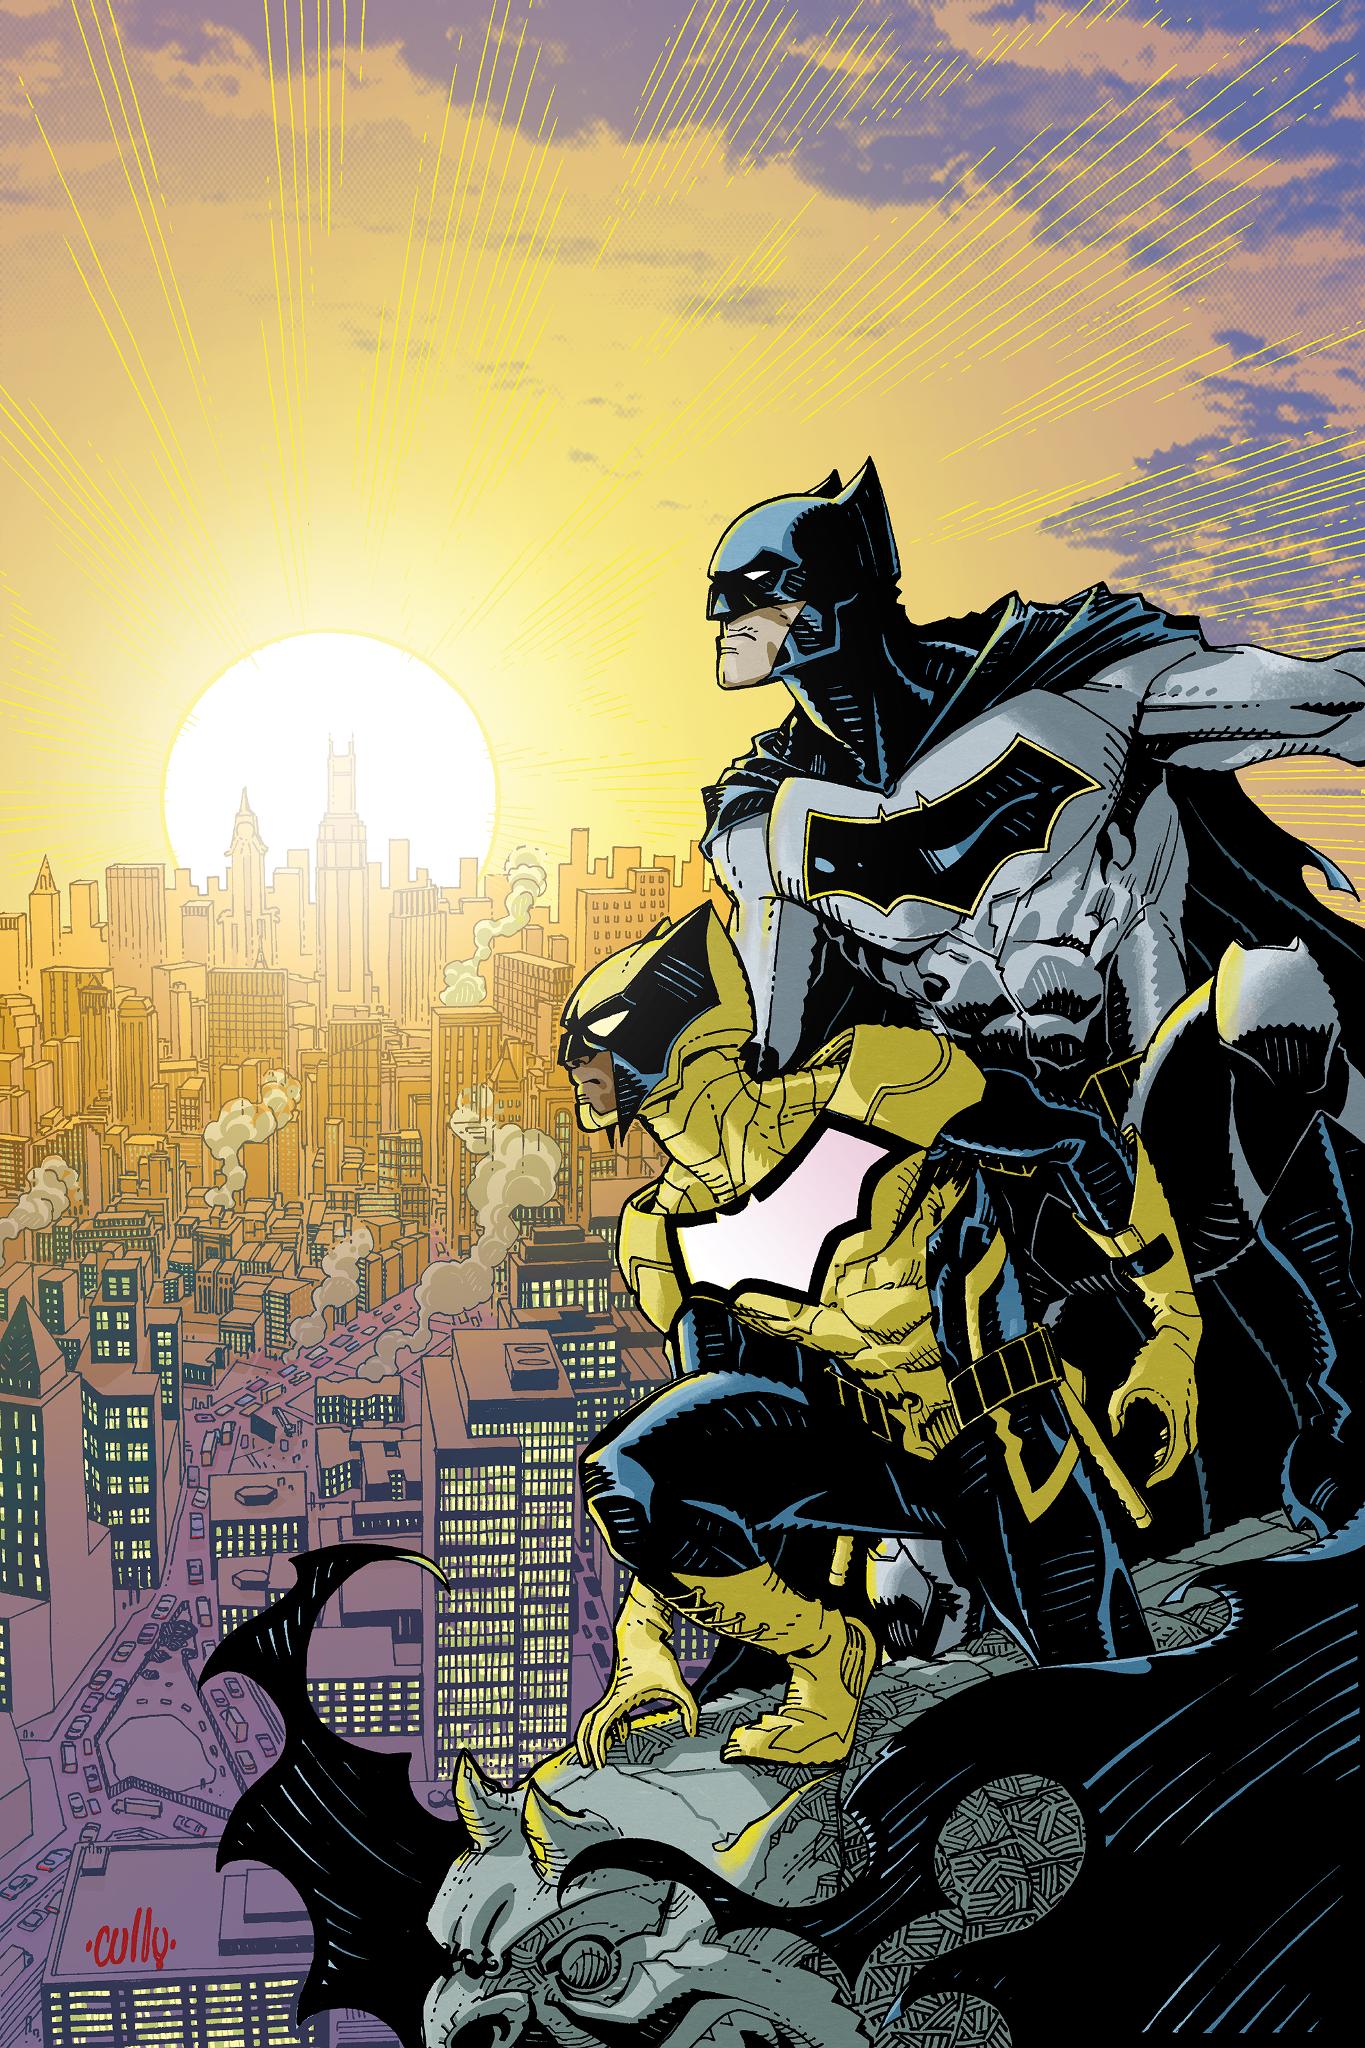 Everything About Batman And The Signal Is Fantastic Except For Signal’s Terrible New Costume